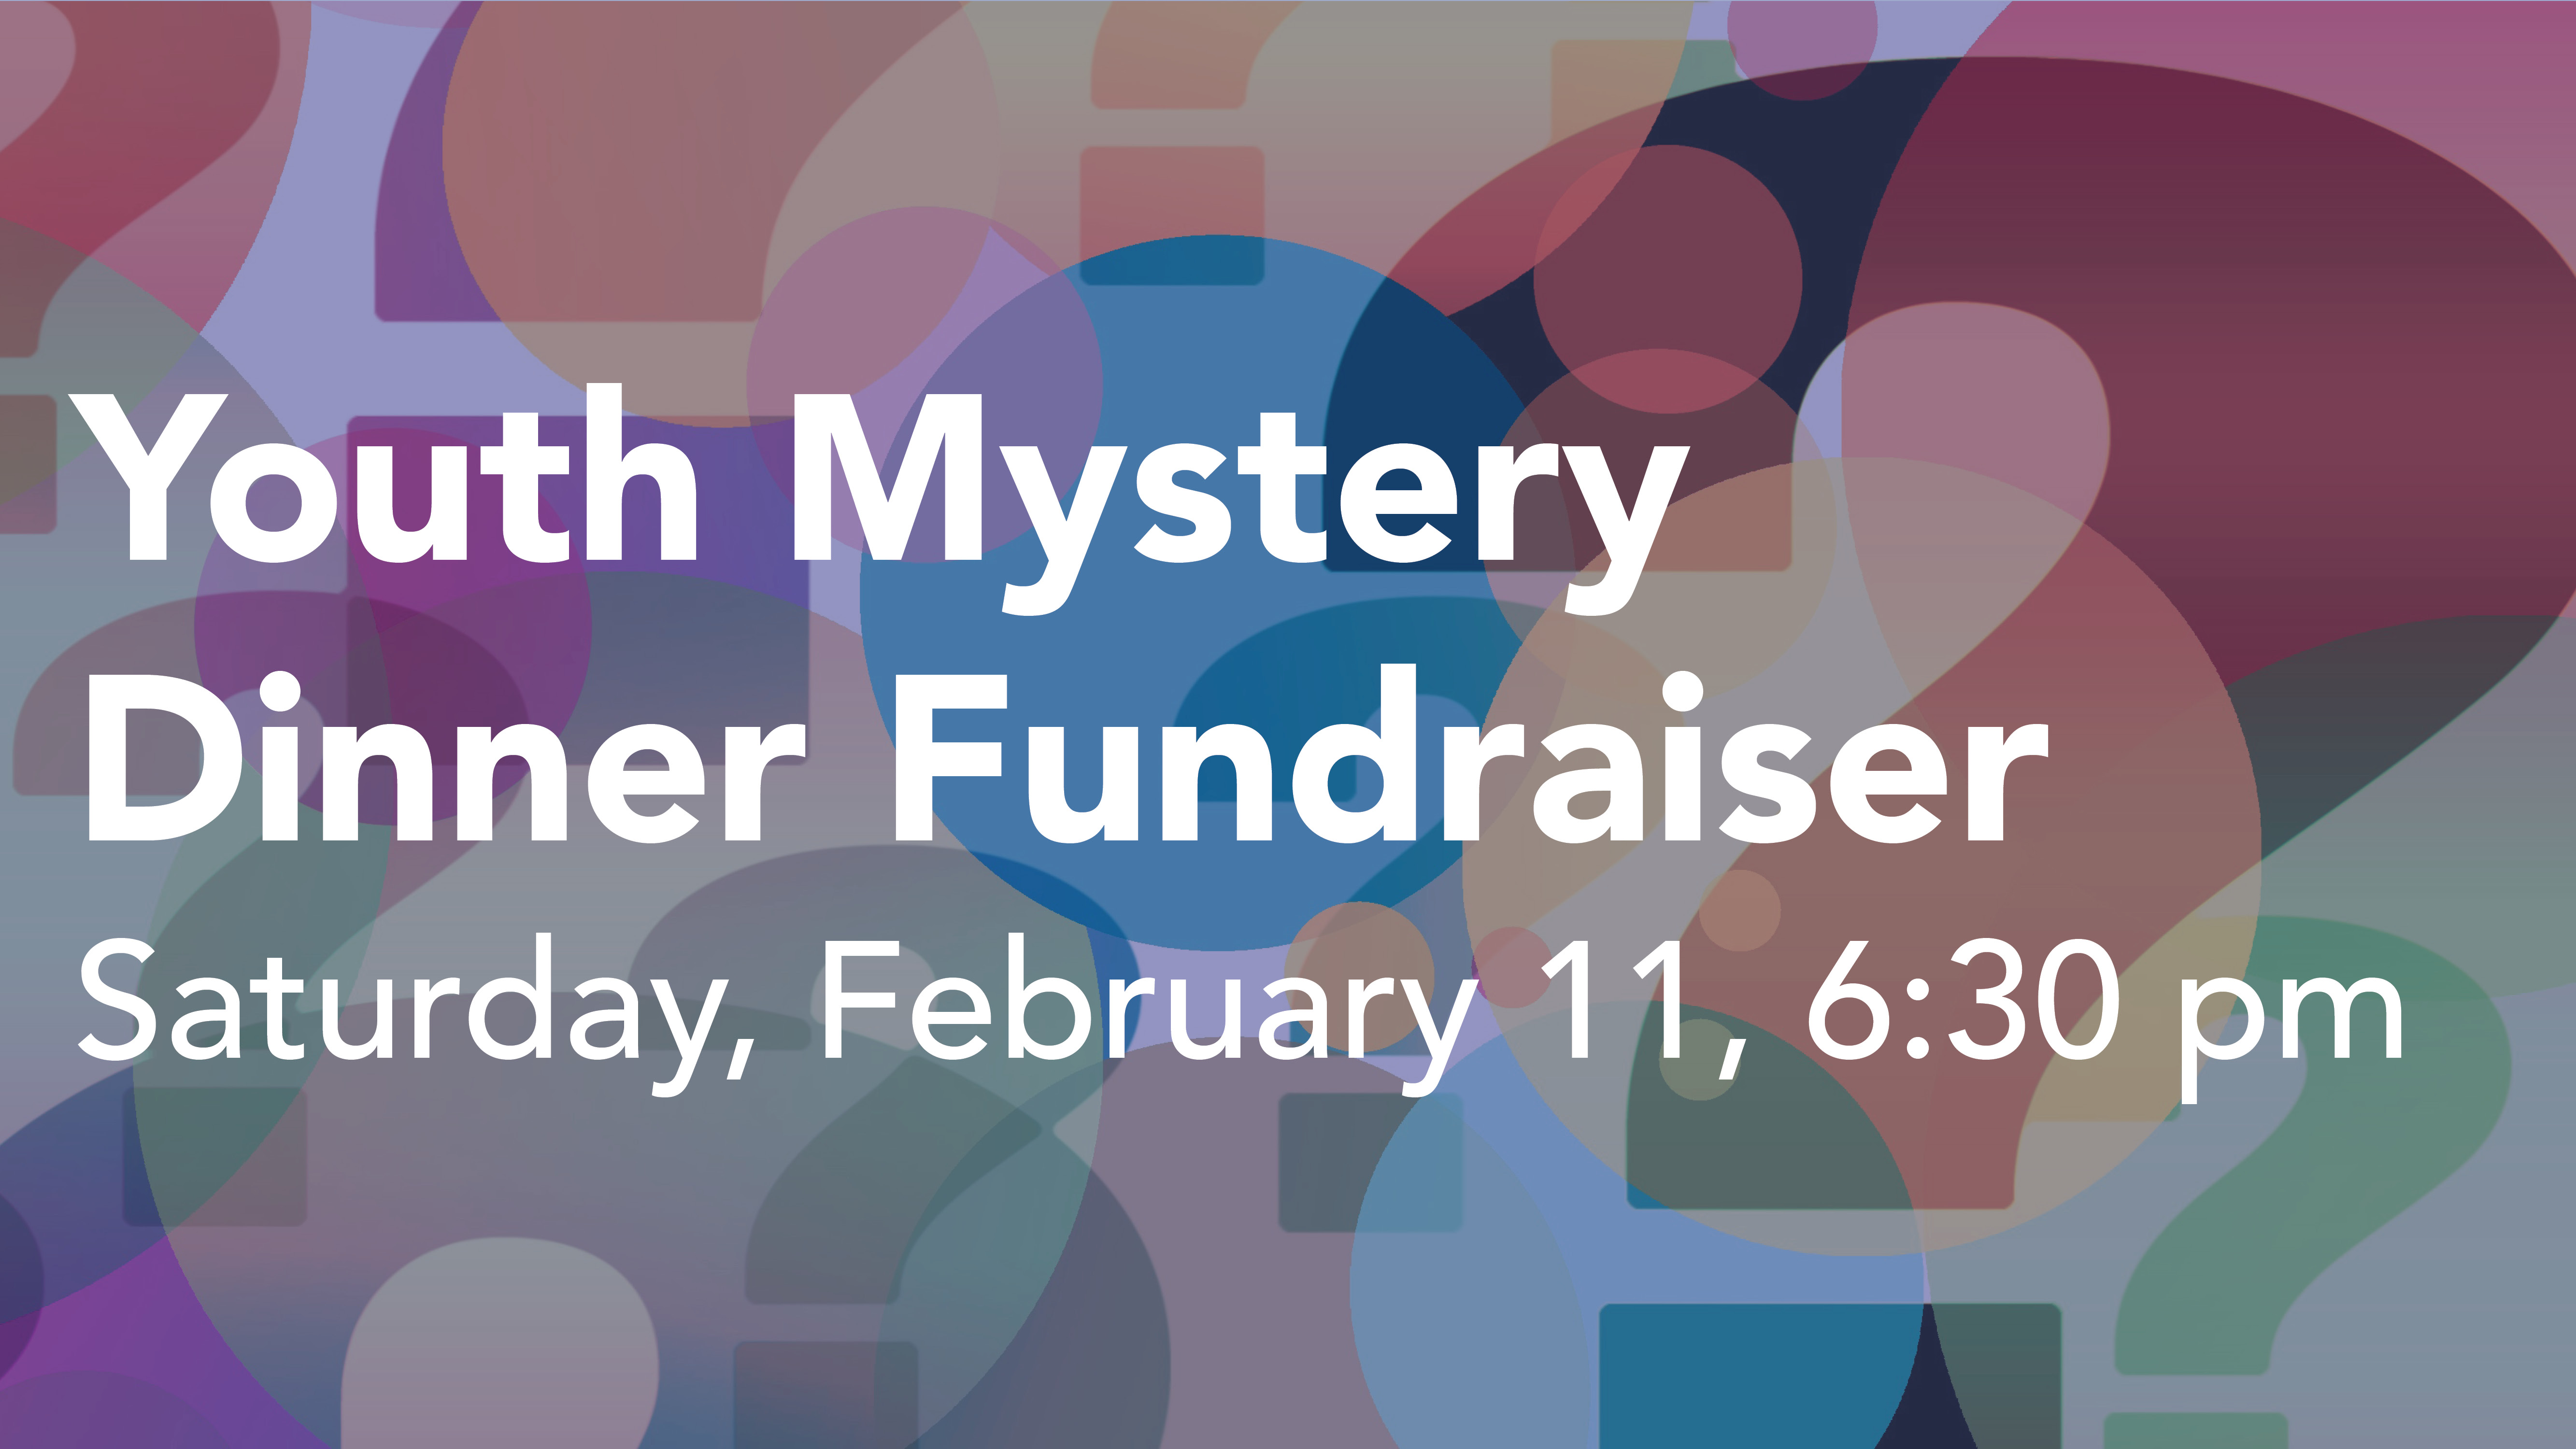 Announcement slide - Youth Mystery Dinner